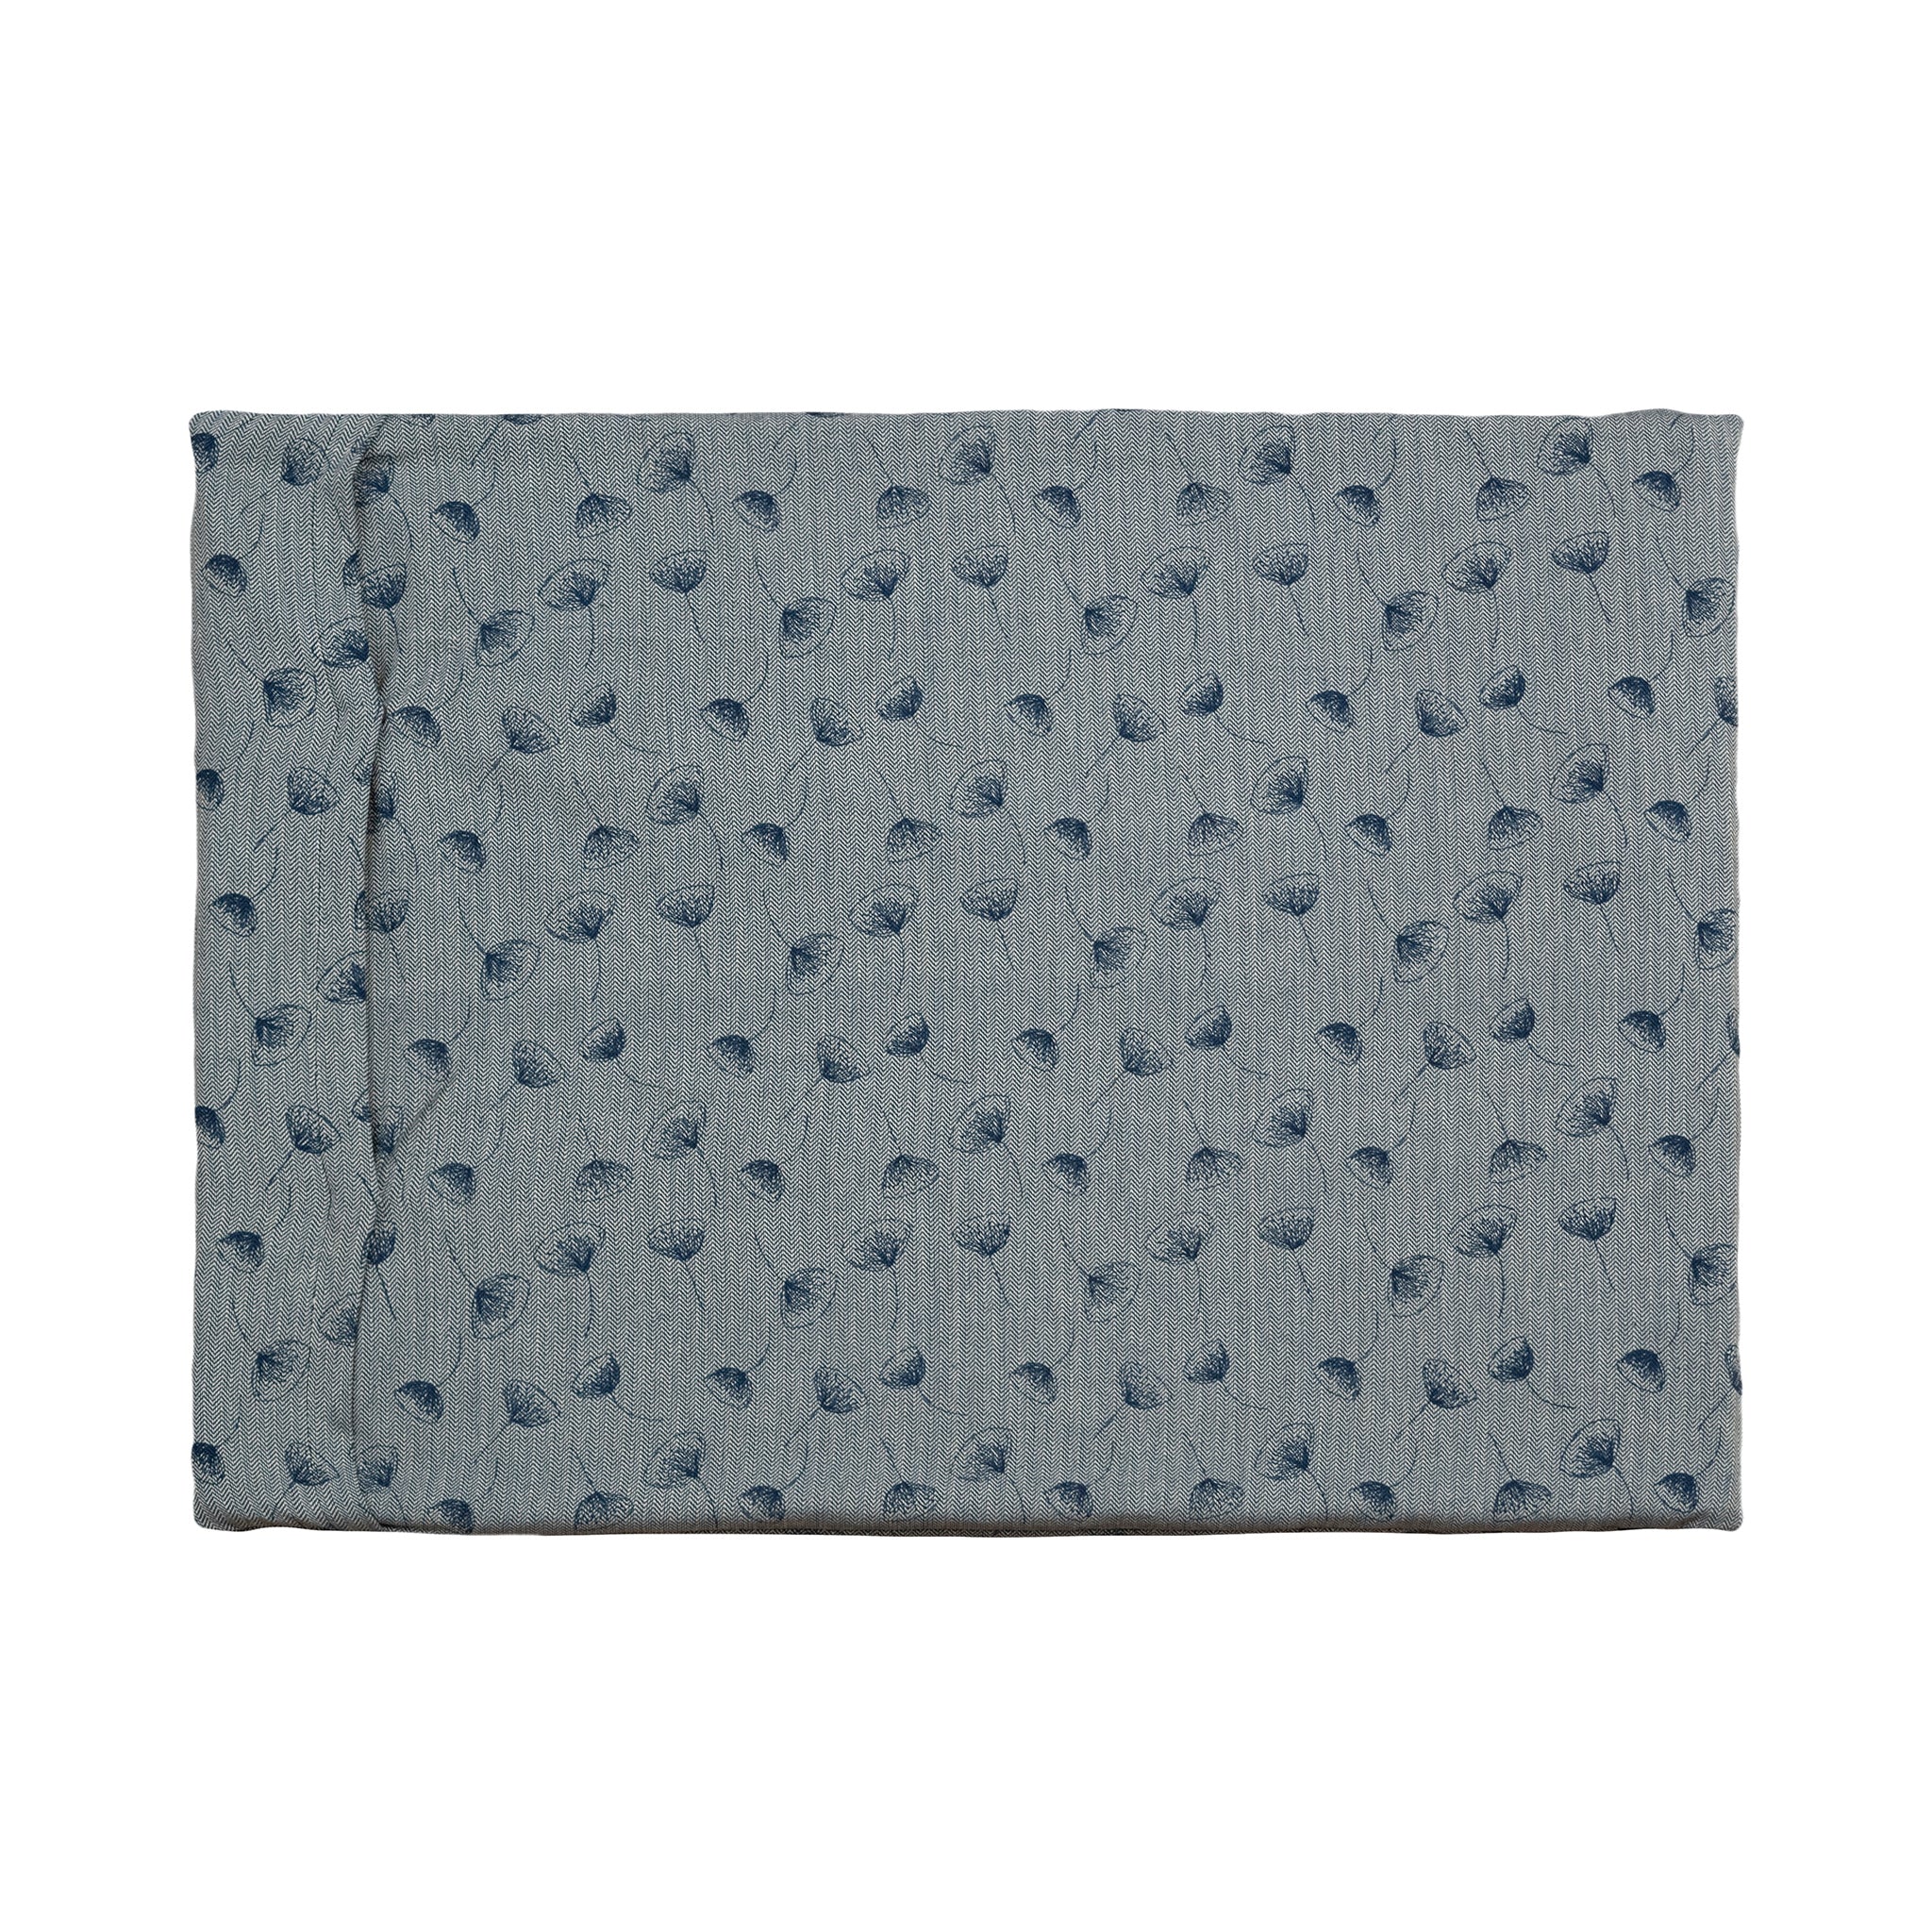 A Chimney Sheep Luxury felted wool dog bed. The bed is large and rectangular. This luxury wool dog bed is placed onto a white background. The organic cotton cover is patterned. The pattern is blue with dark blue flowers.